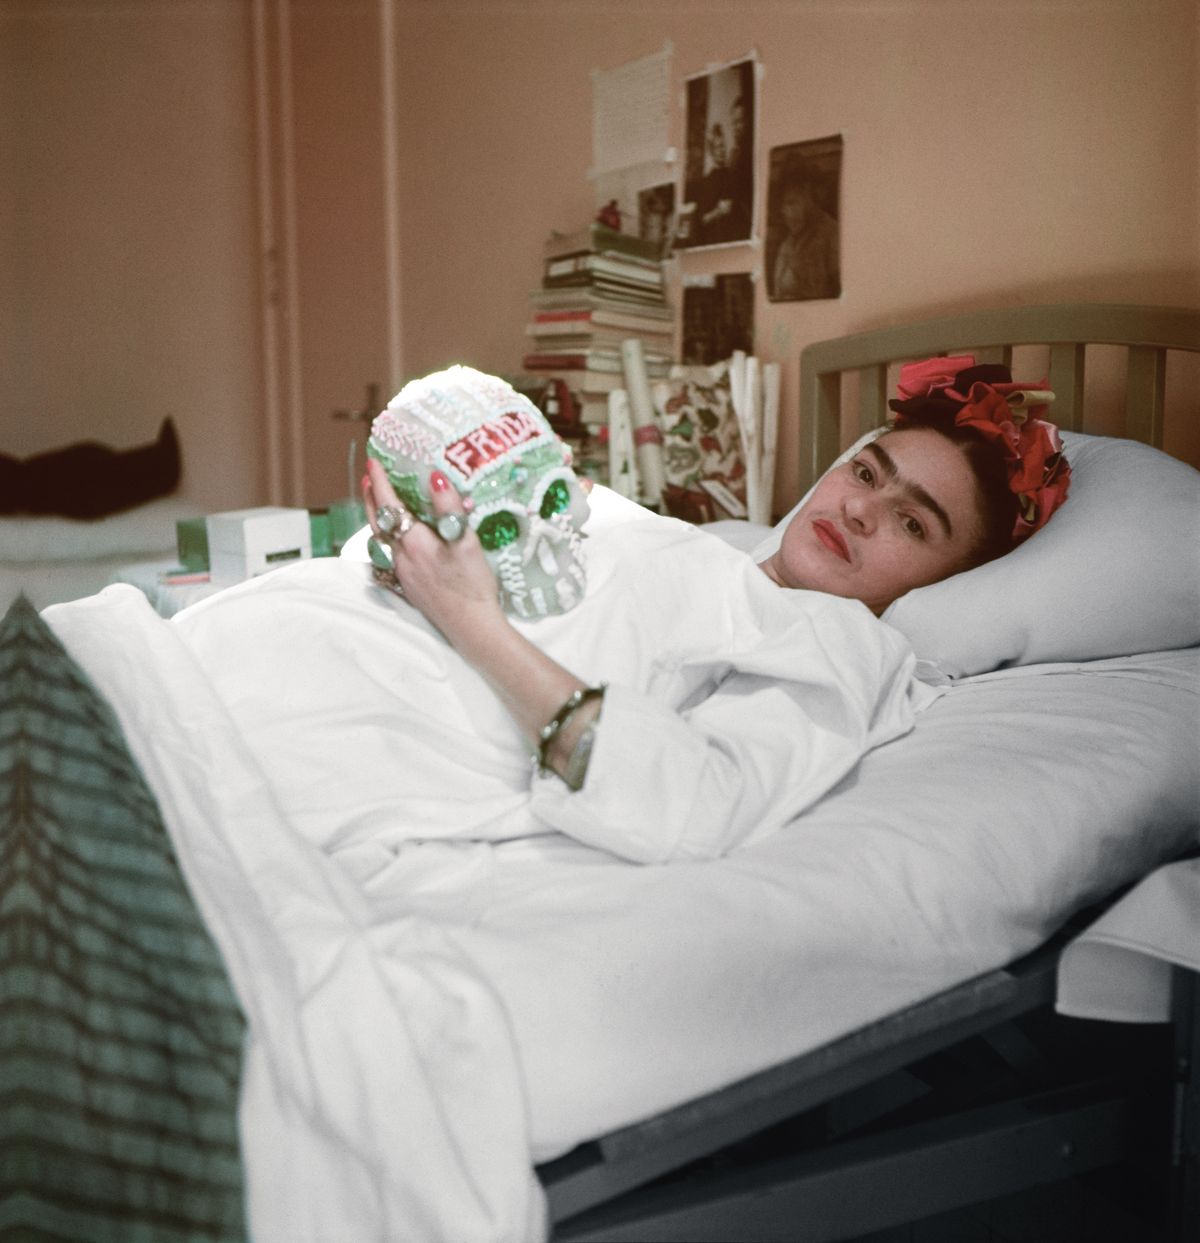 Frida Kahlo in her room at the Hospital Inglés in 1950 Courtesy Fundación Televisa Collection and Archive; photo: Juan Guzmán